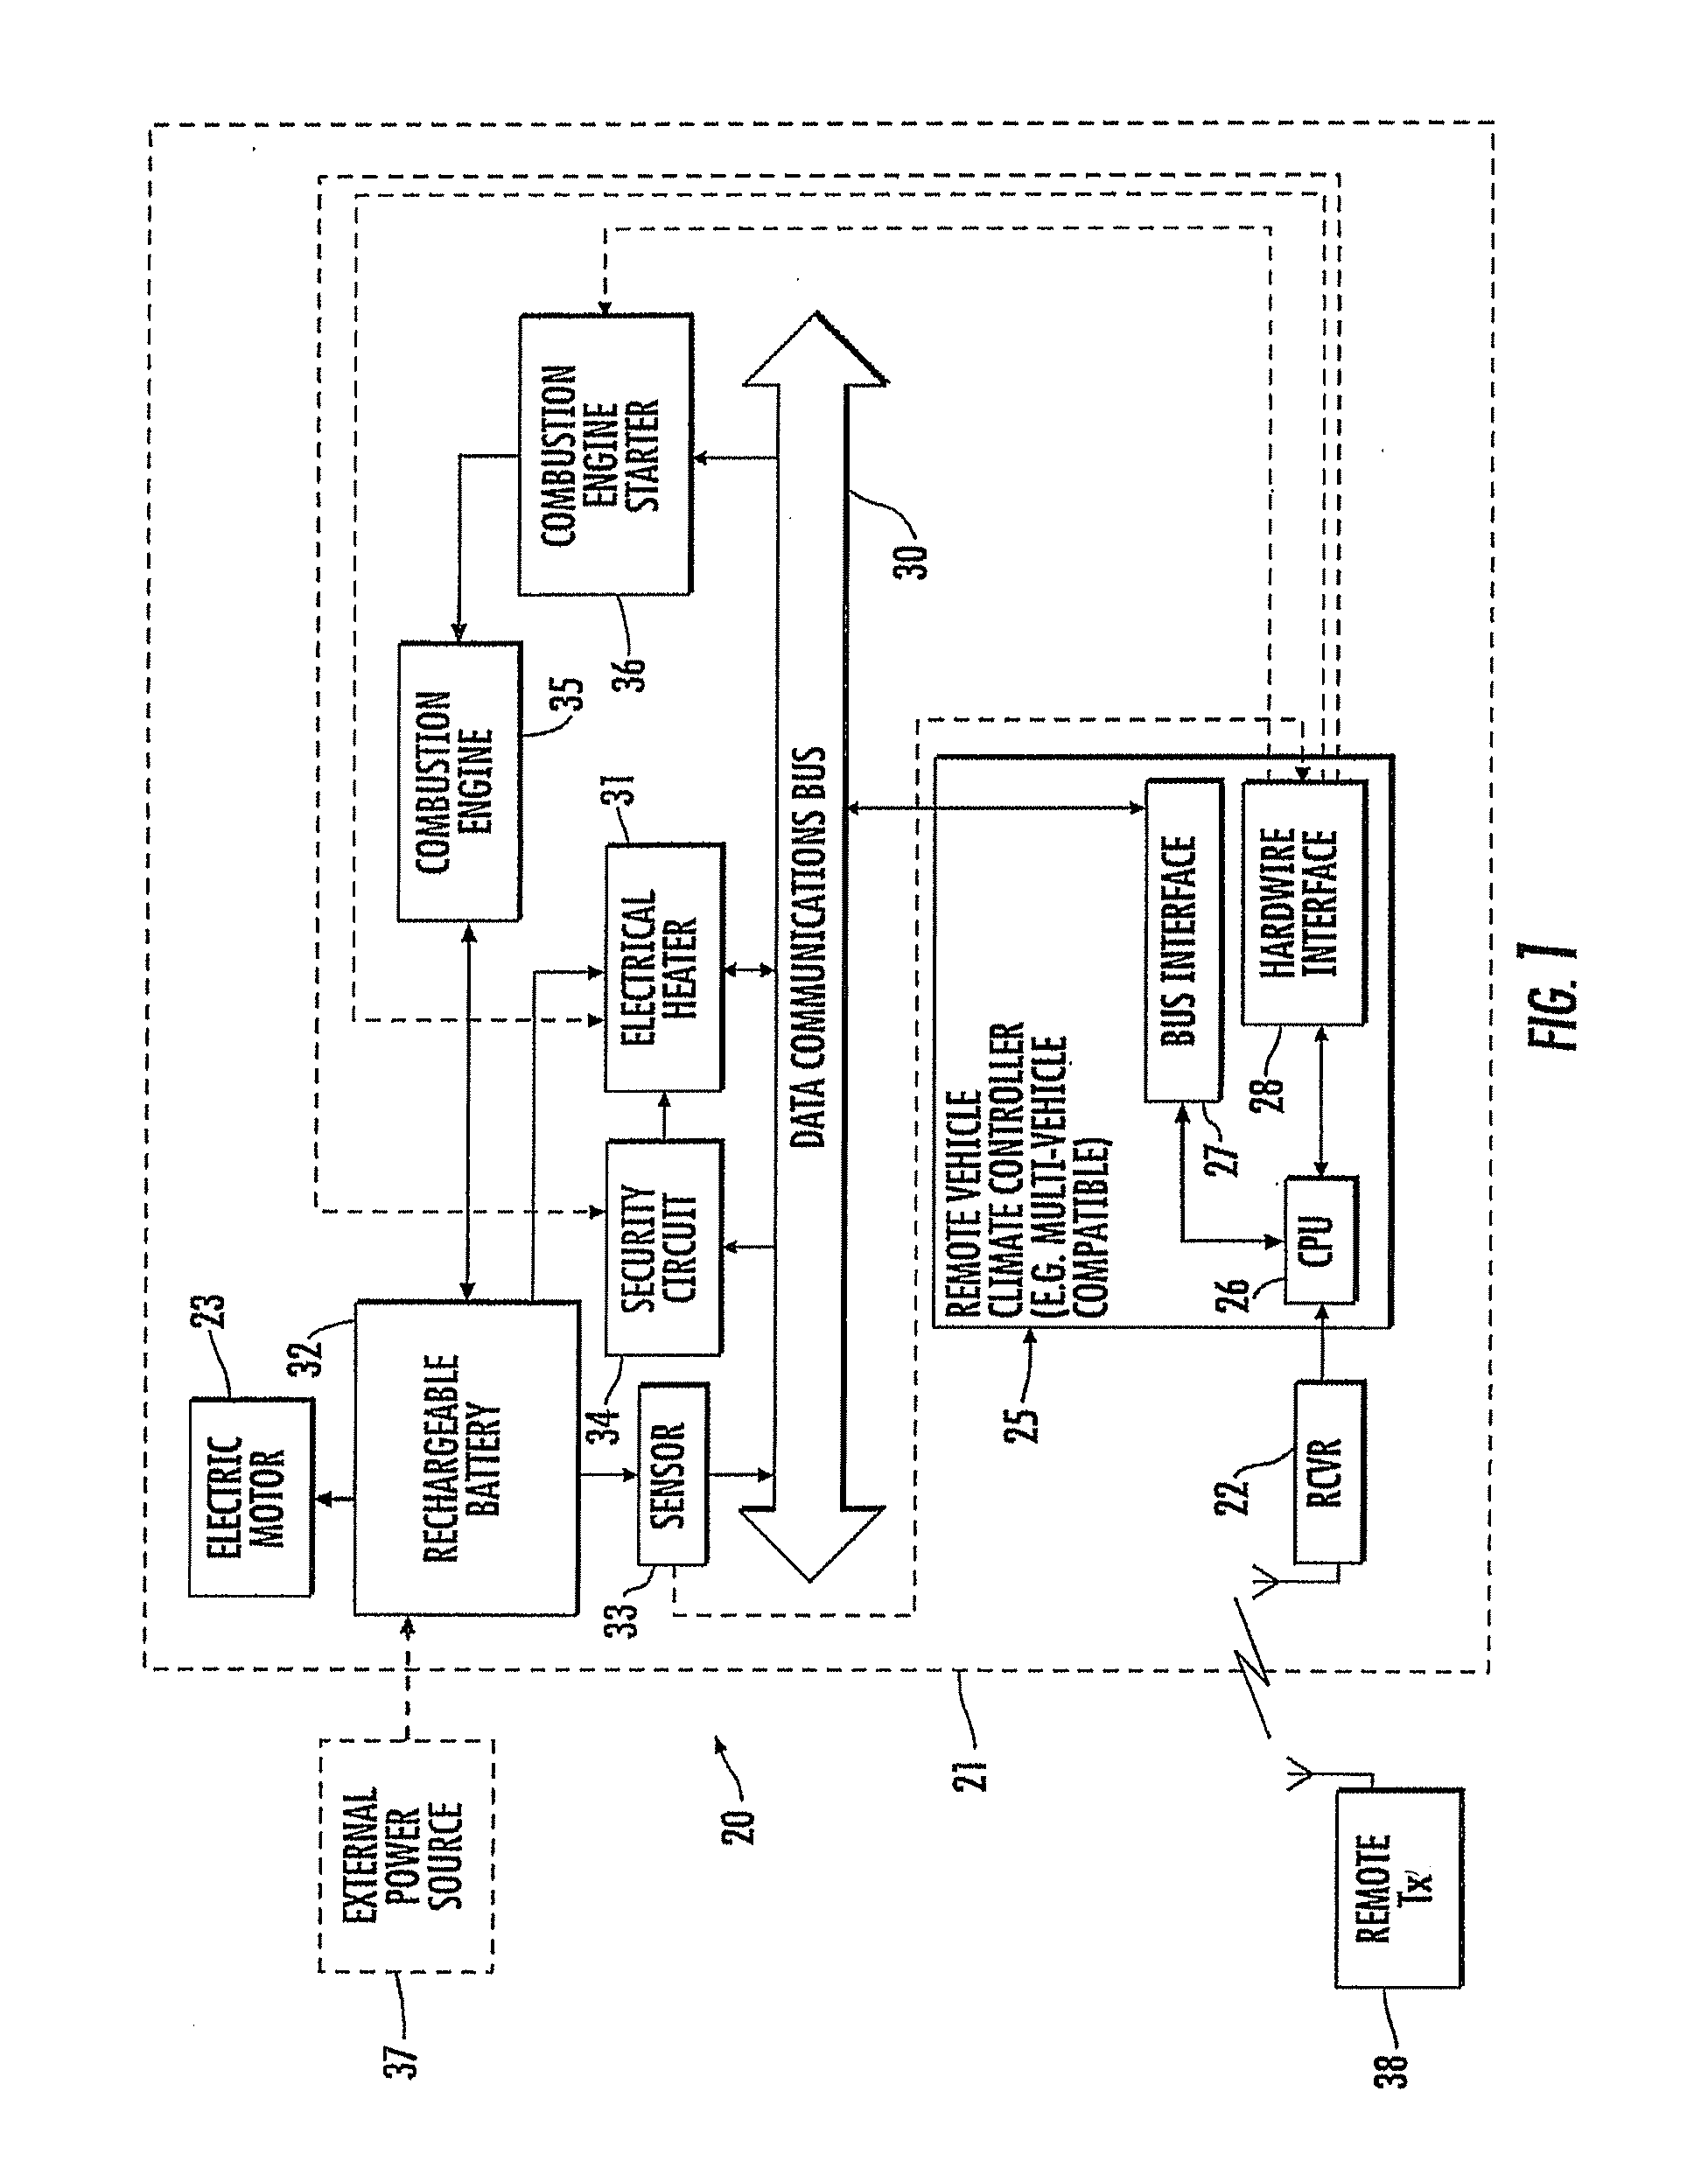 Remote climate control device including electrical ventilation blower for an electric vehicle and associated methods